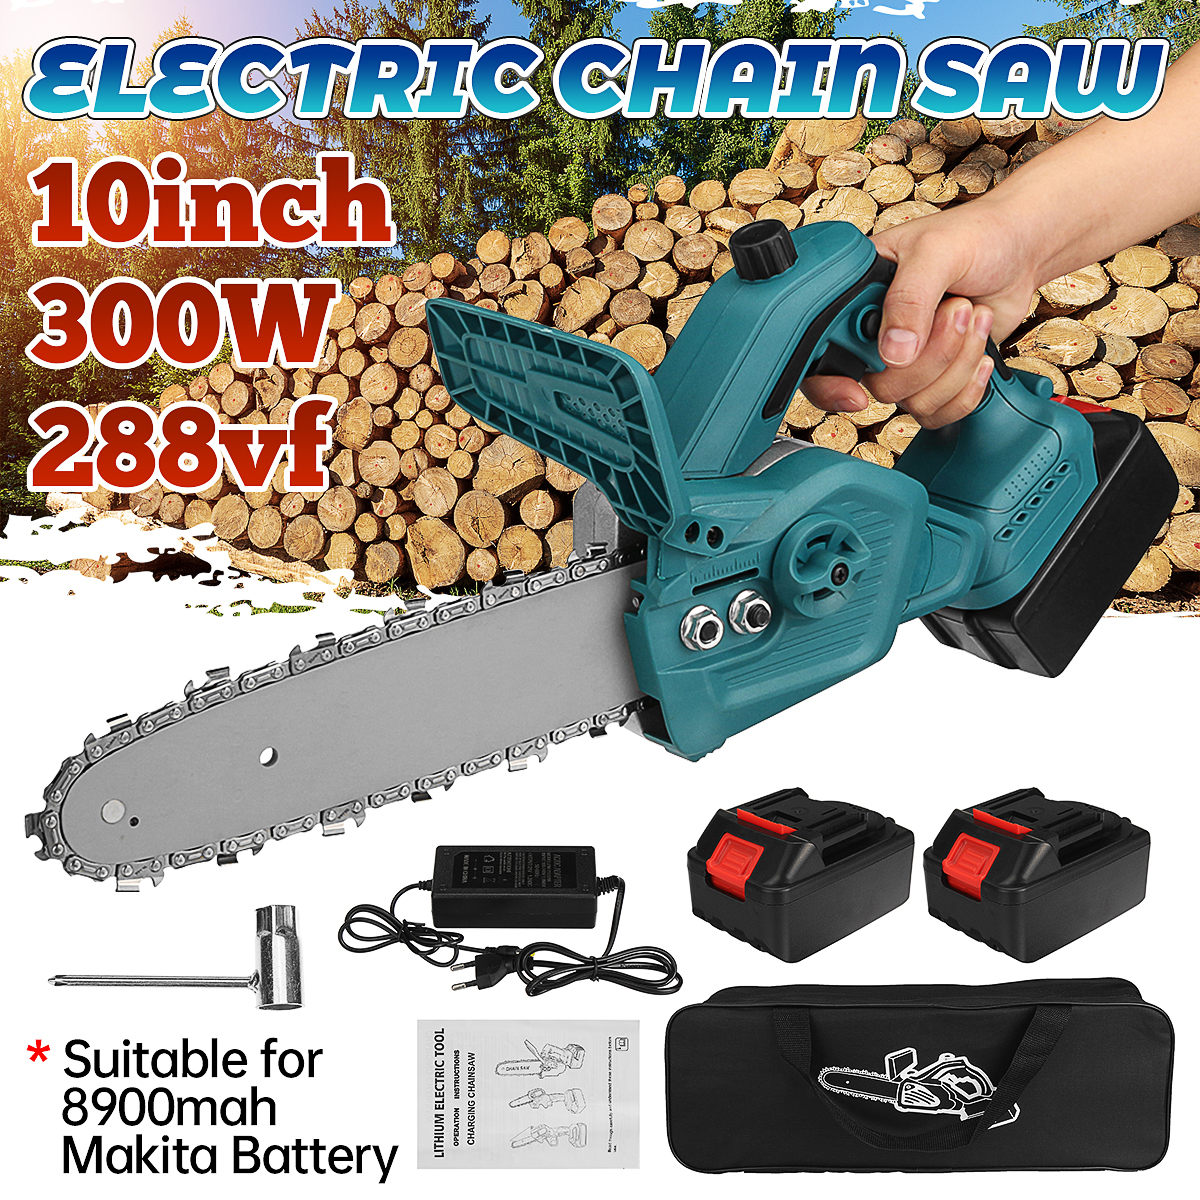 288VF-300W-10In-One-hand-Electric-Rechargeable-Chain-Saw-Cordless-Chainsaw-Wood-Cutter-Woodworking-T-1896287-1